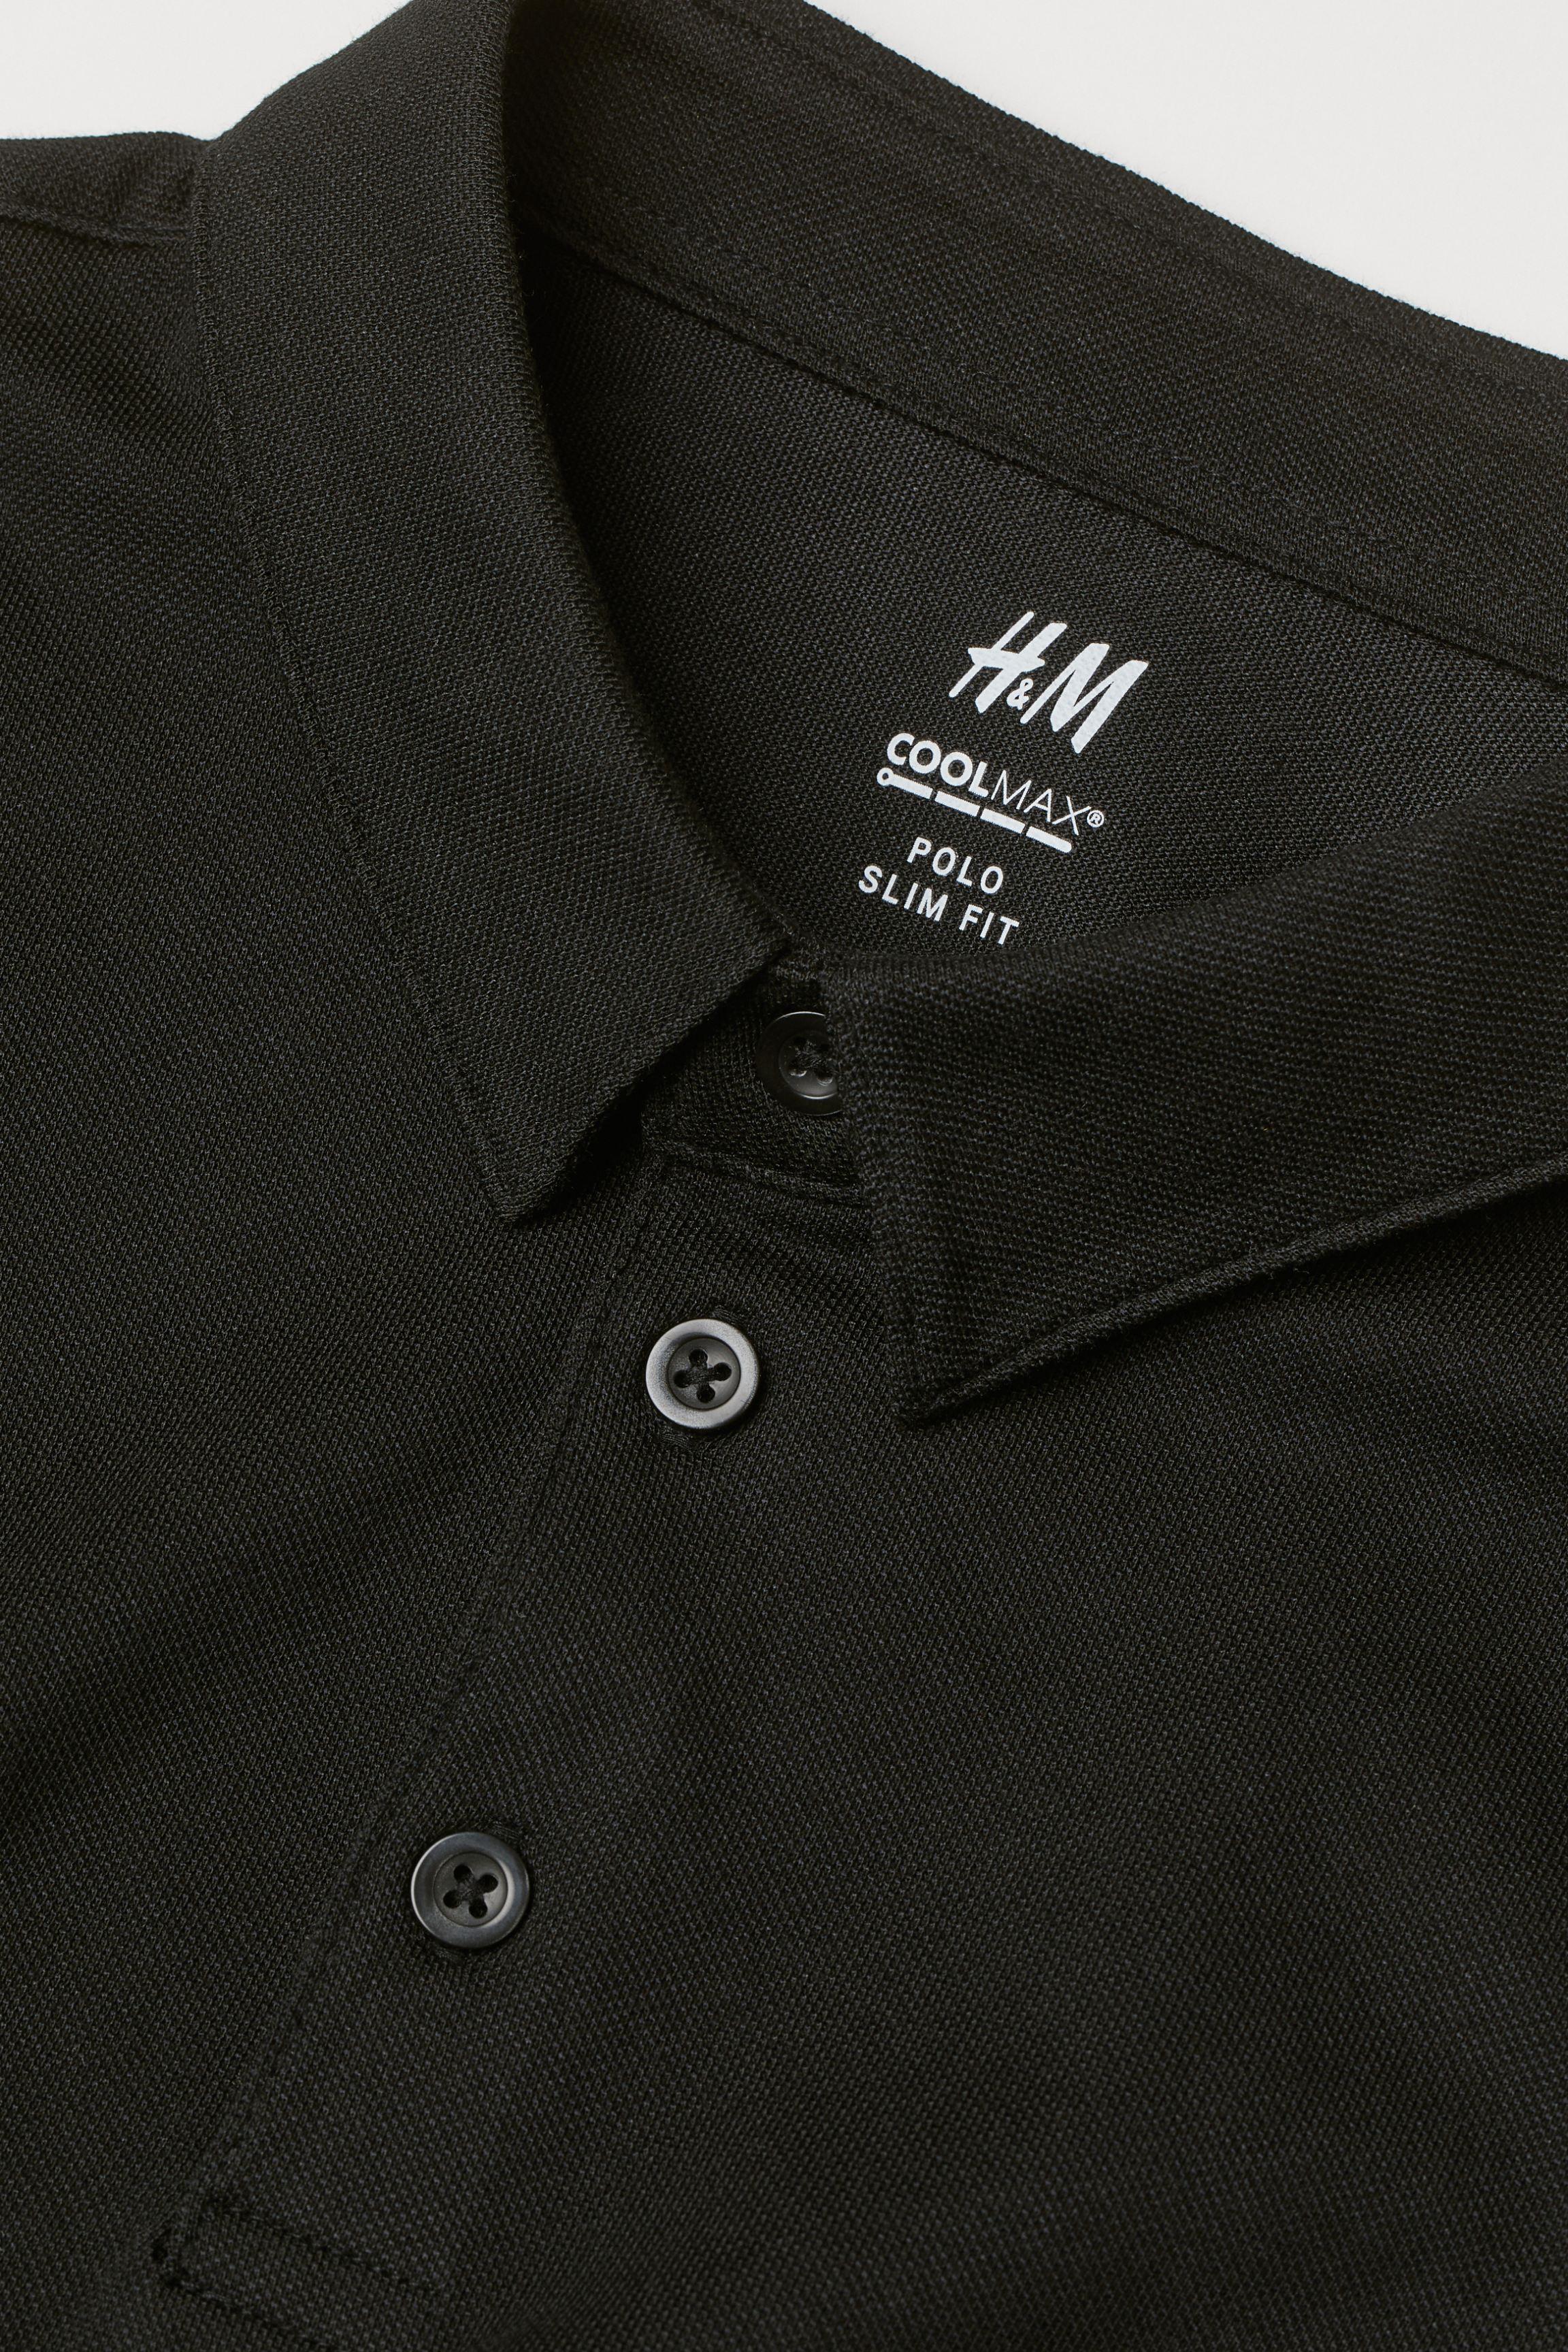 H&M Slim Fit Coolmax® Polo Shirt in Black for Men - Lyst